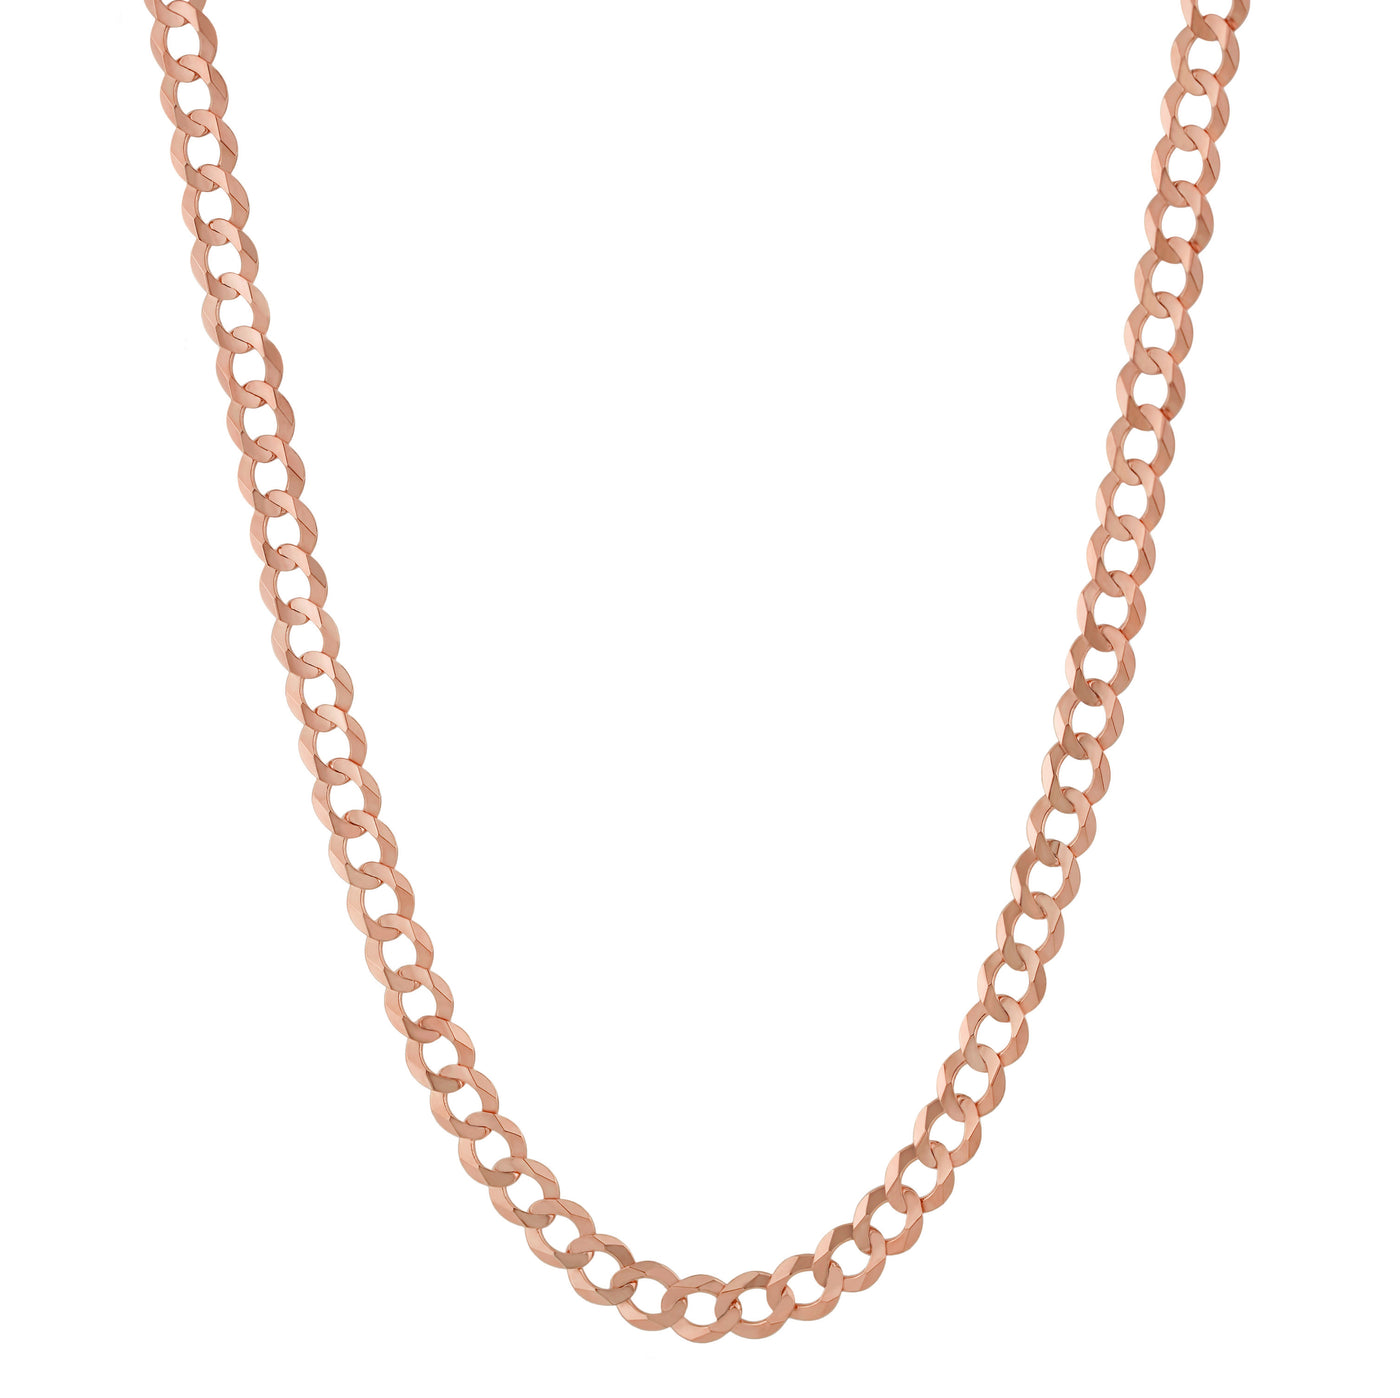 Miami Curb Link Chain Necklace 14K Rose Gold - Solid